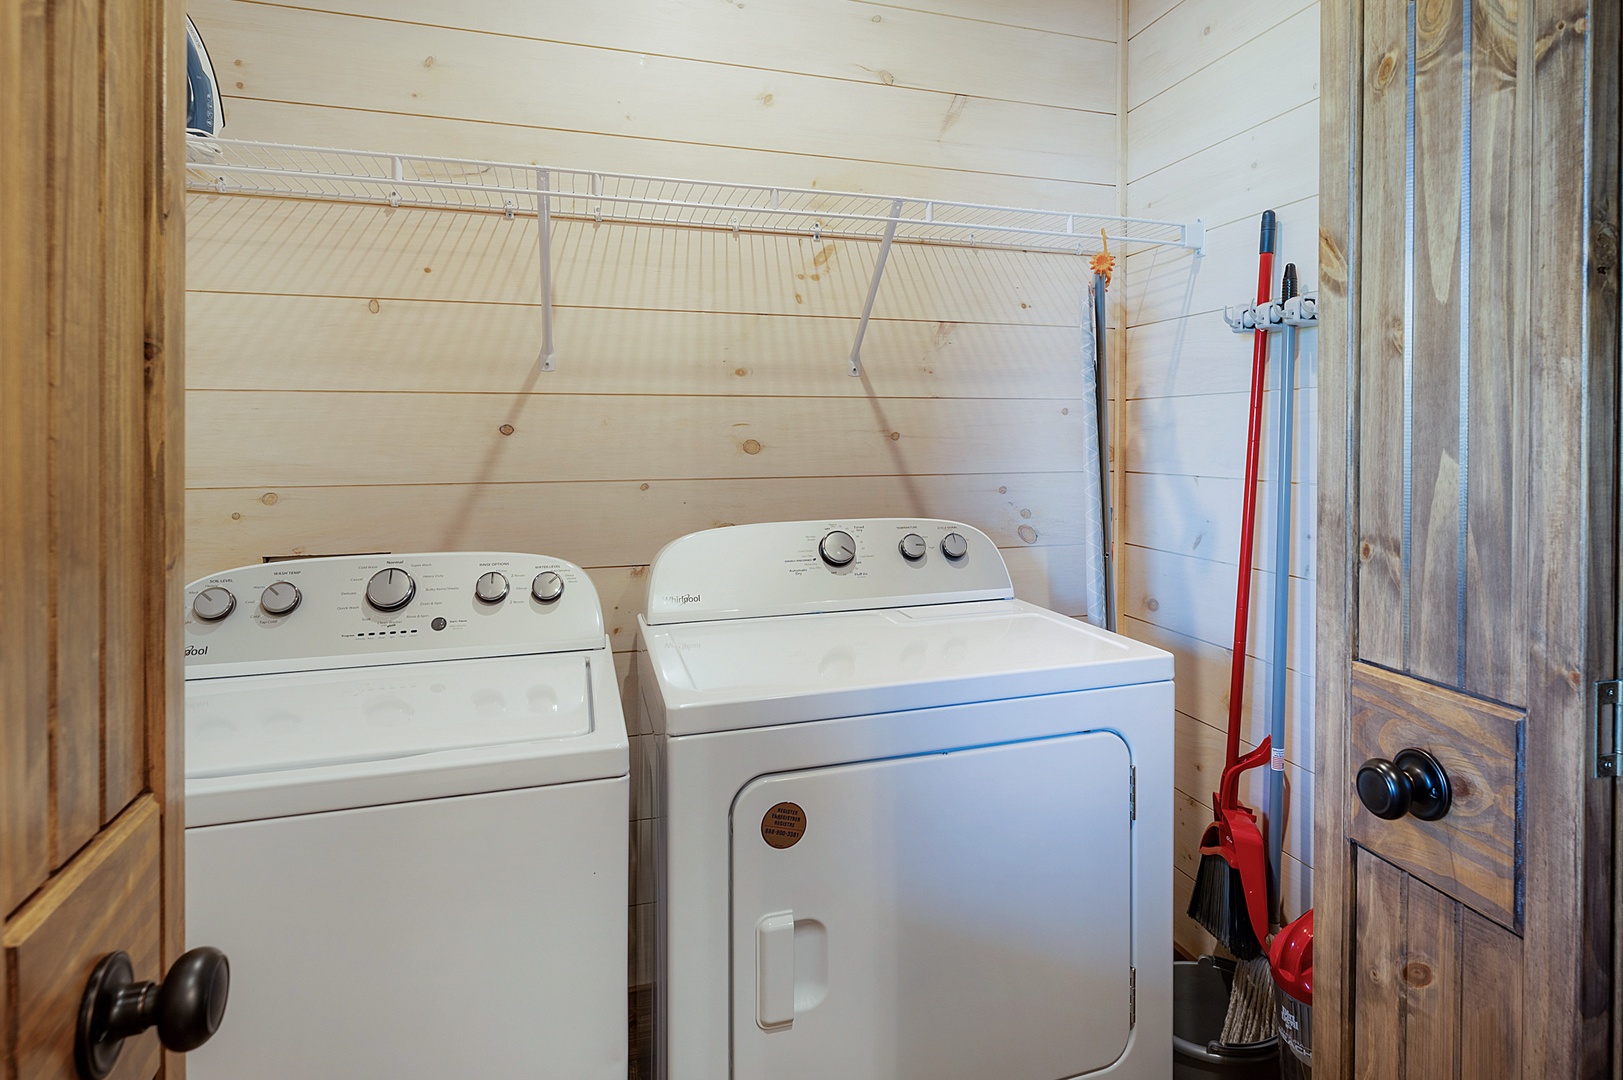 Mountain Air - Mountain Air - Entry Level Laundry Room